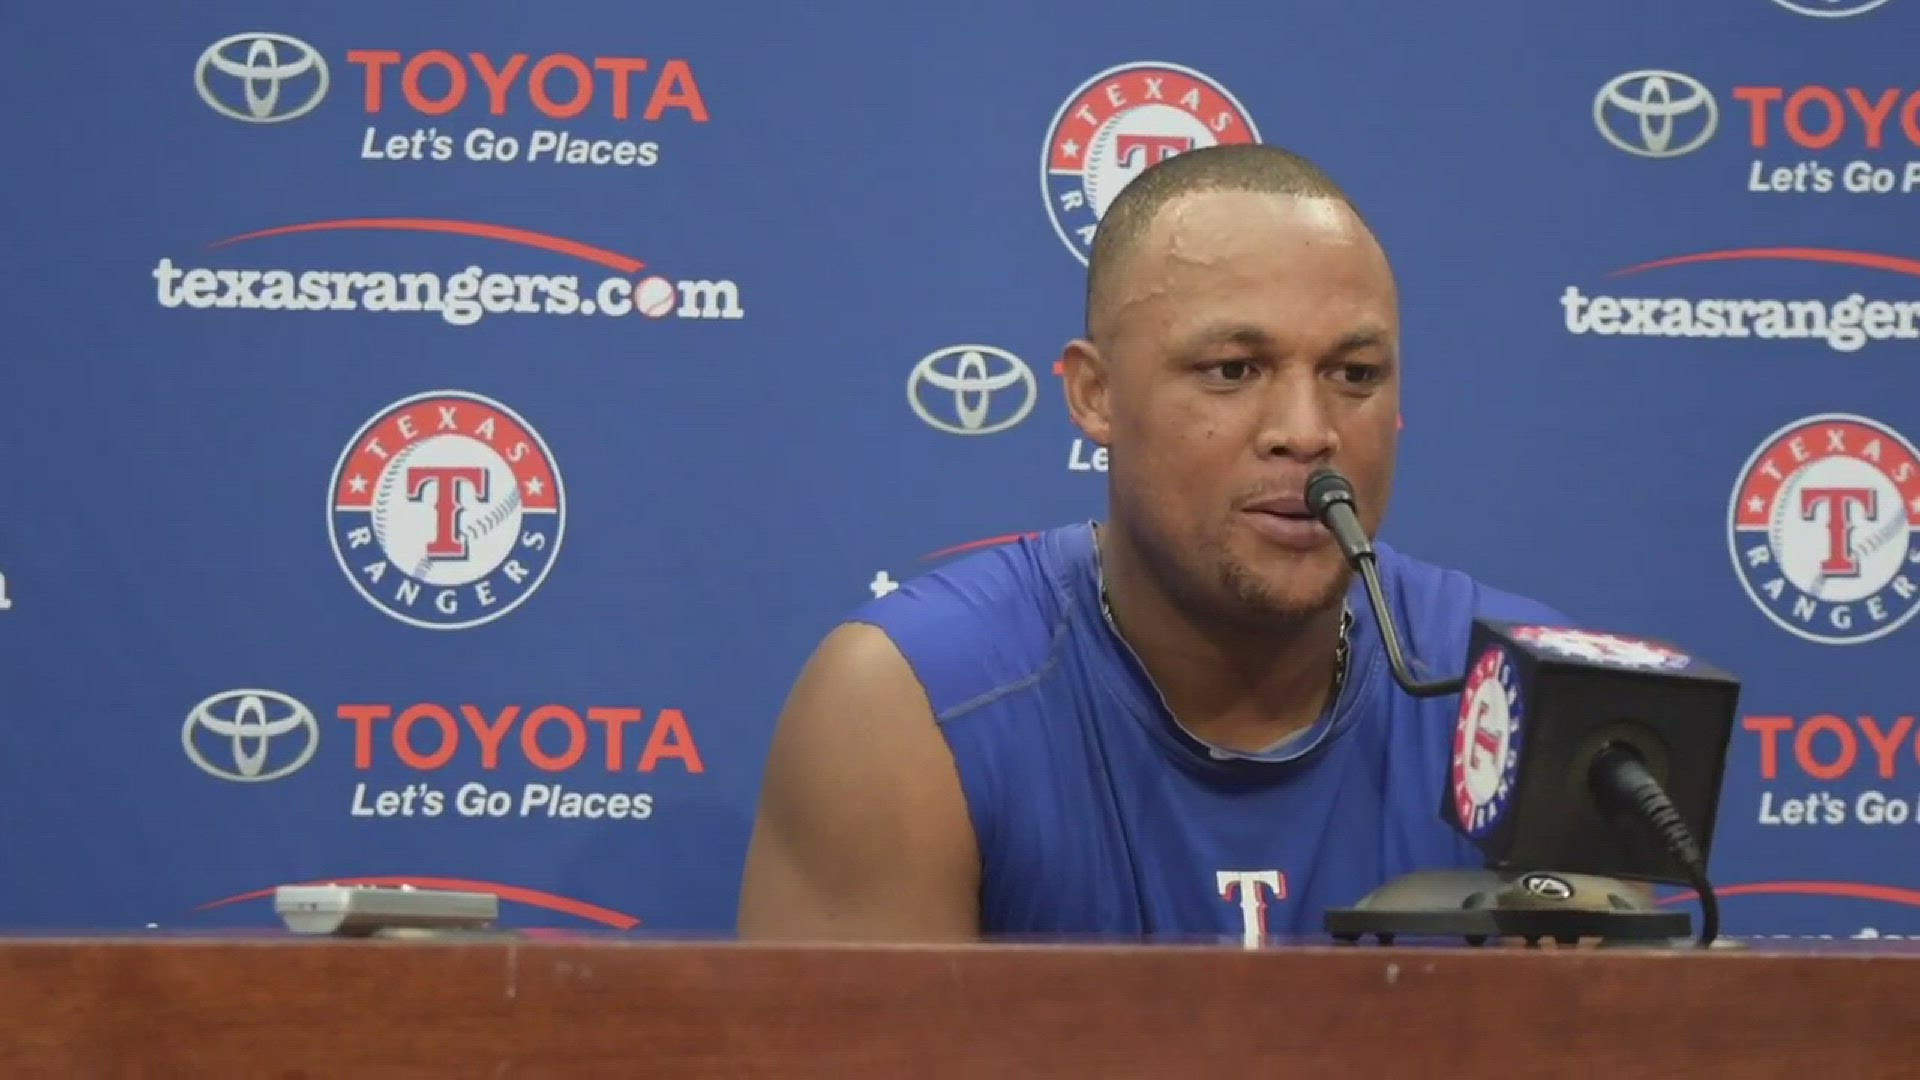 Adrian Beltre reflects on his quest to win a World Series and how that might not come to fruition